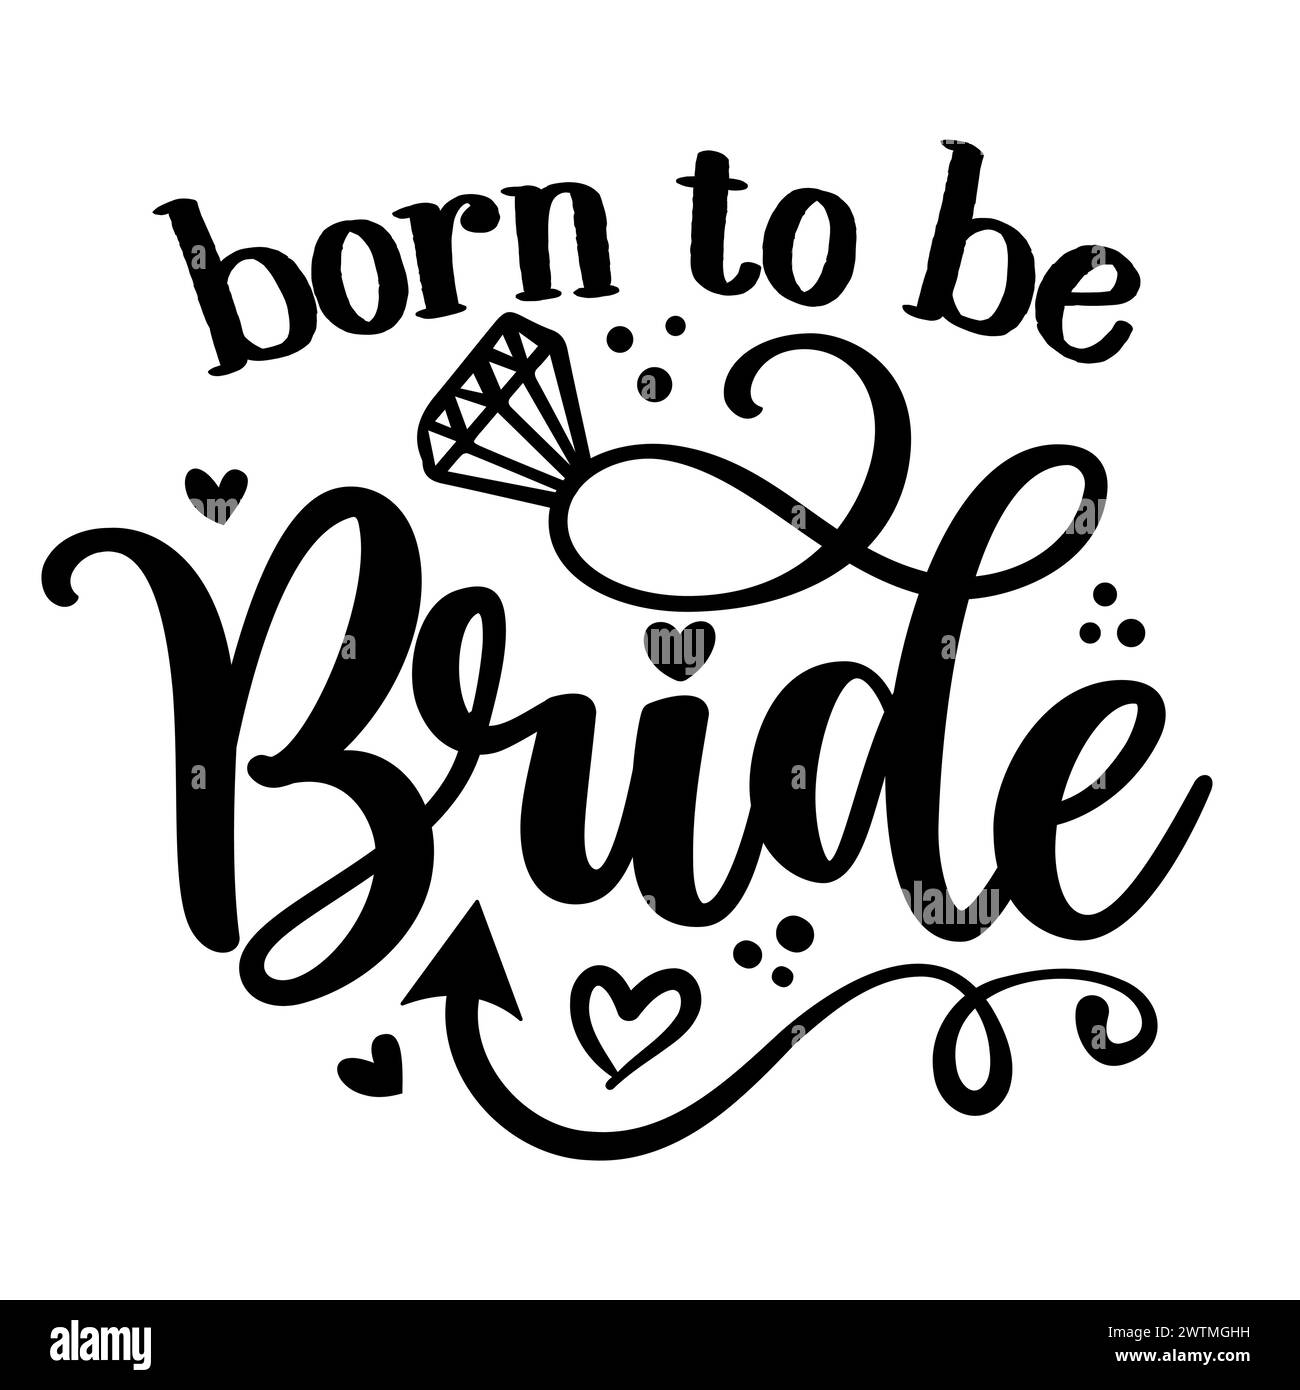 Bride to be - Black hand lettered quote with diamond ring for greeting card, gift tag, label, wedding sets. Groom and bride design. Bachelorette party Stock Vector